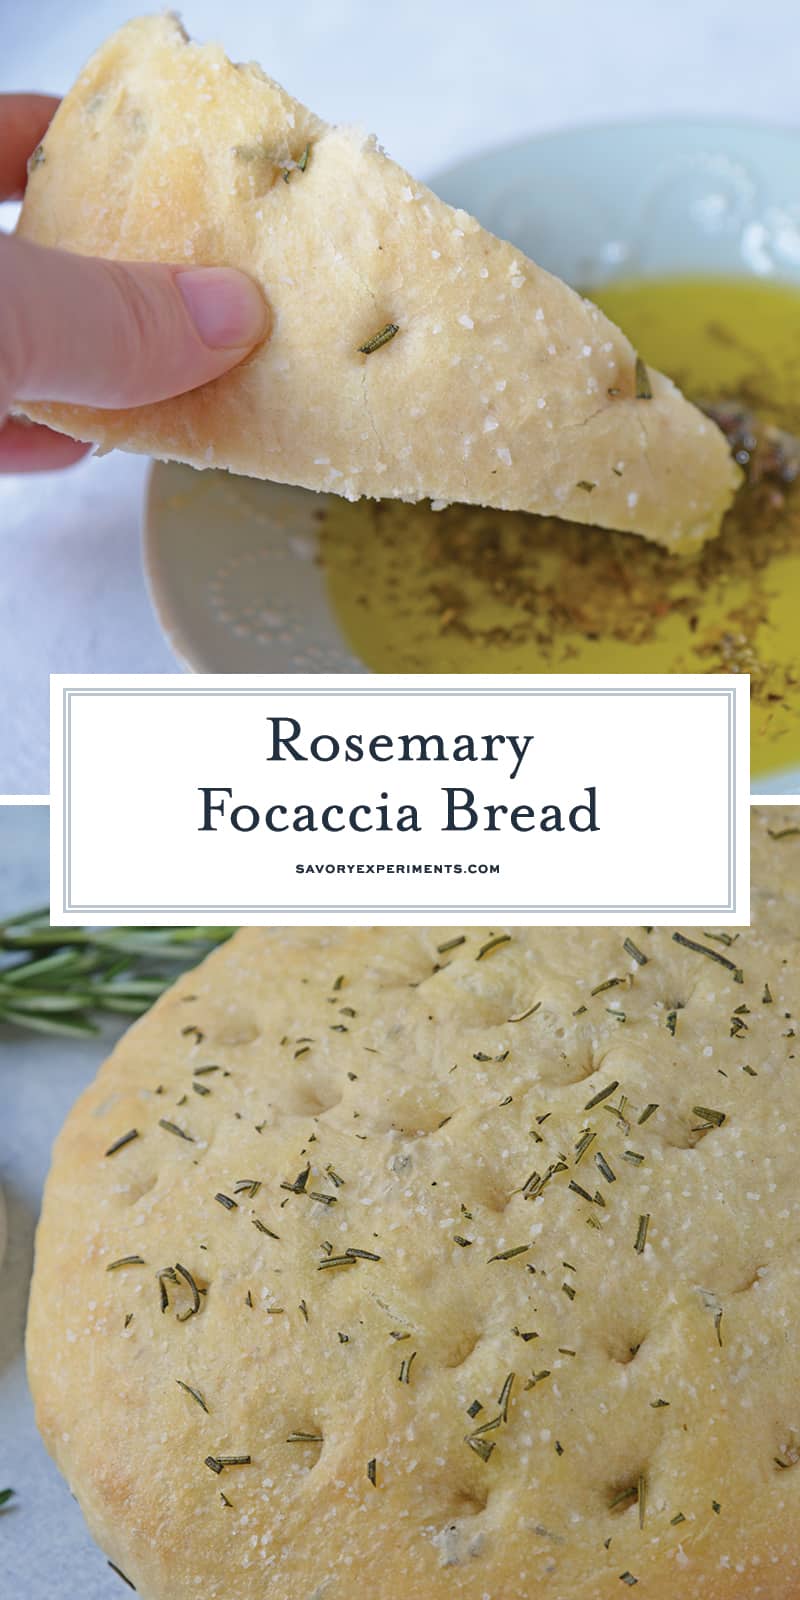 Rosemary Focaccia Bread is a recipe you can be proud of! Pair with homemade butter or olive oil bread dip for the best appetizer.  #focacciabread #easybreadrecipes www.savoryexperiments.com